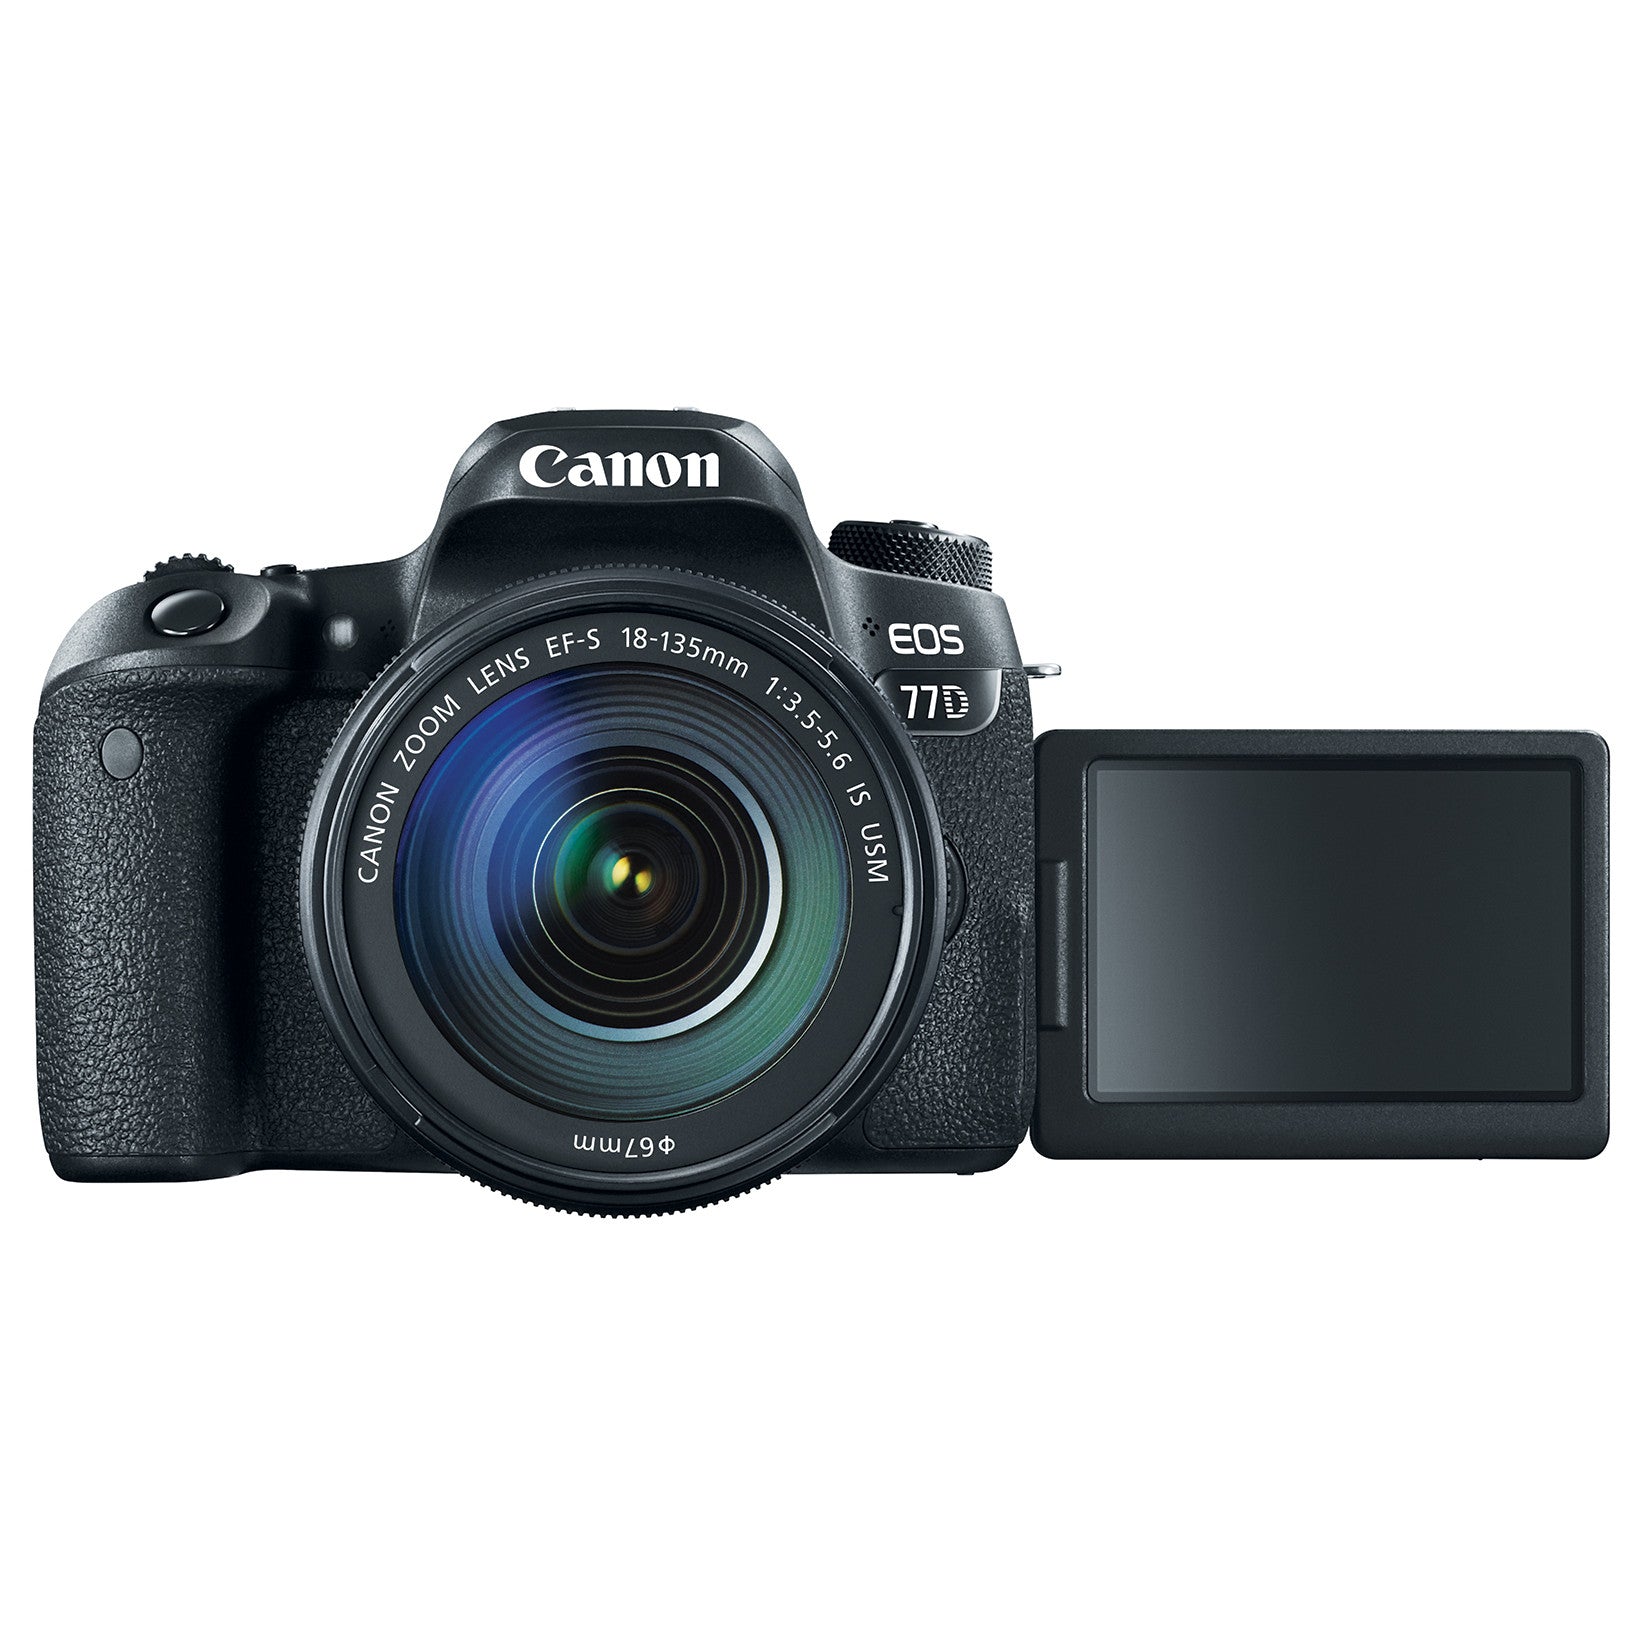 Canon EOS 77D DSLR Camera with 18-135mm IS STM Lens